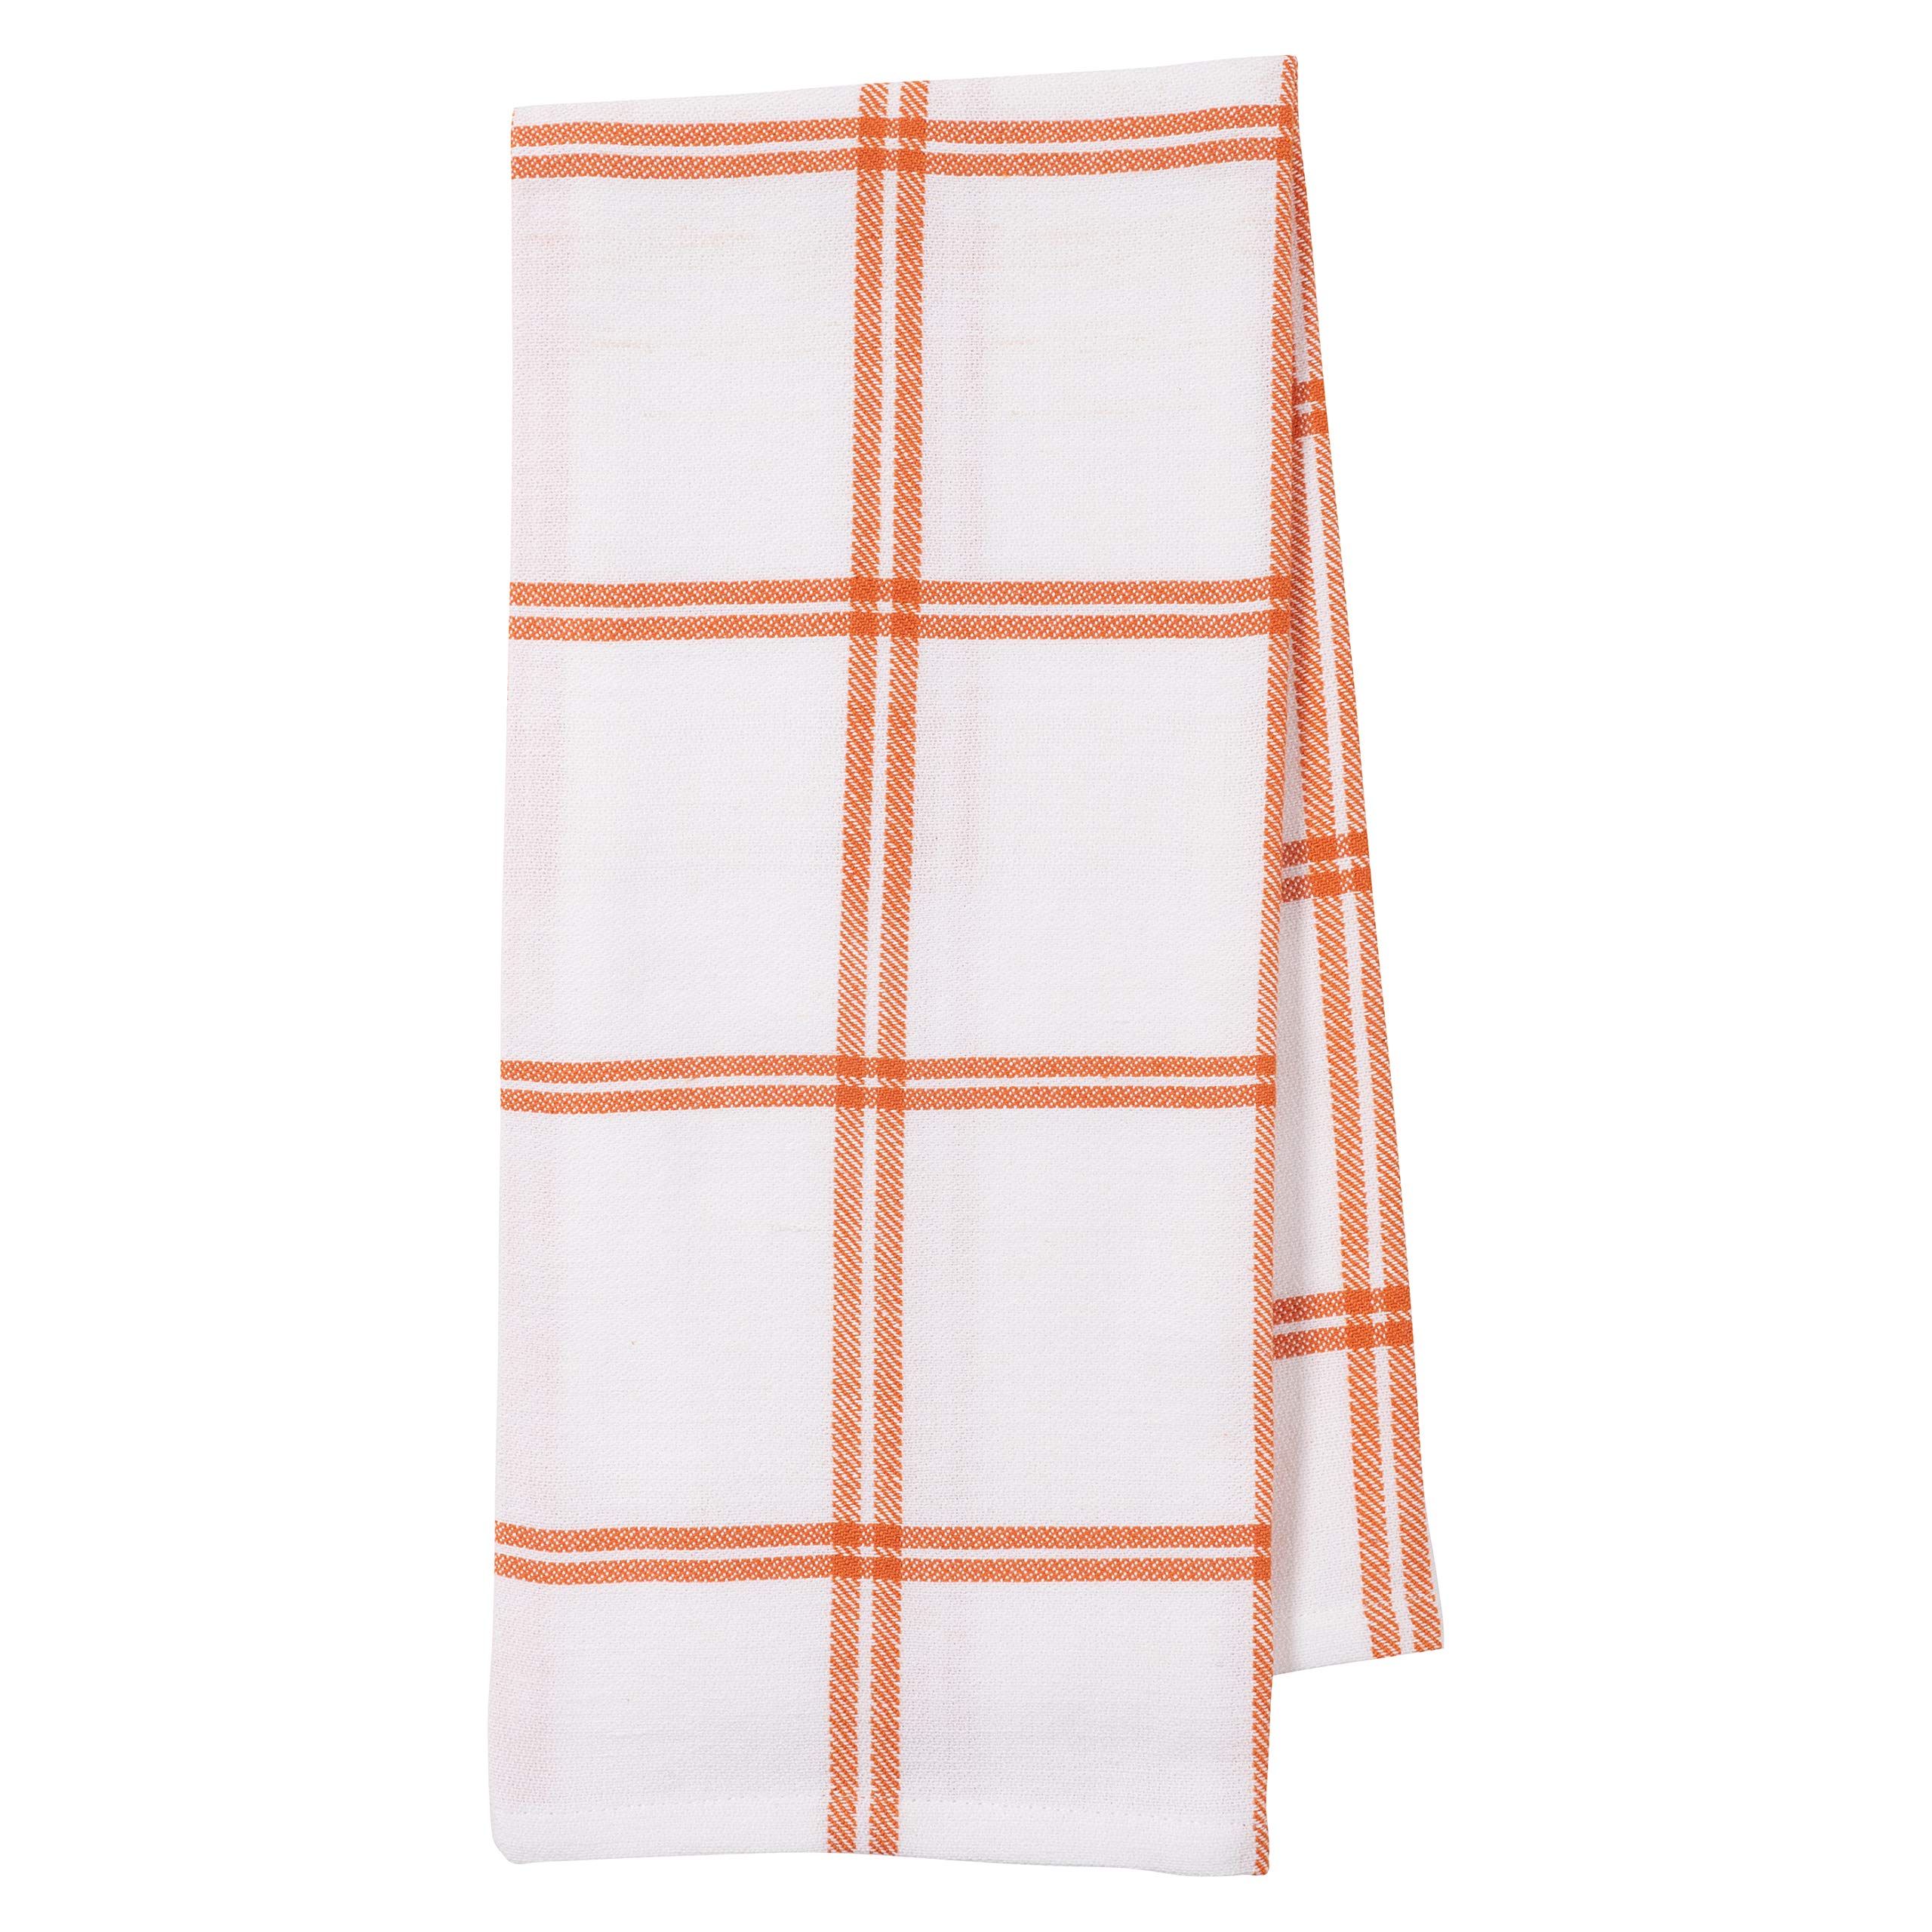 KAF Home Pantry Kitchen Holiday Dish Towel Set of 4, 100-Percent Cotton, 18 x 28-inch (Pumpkin Spice Everything Nice)